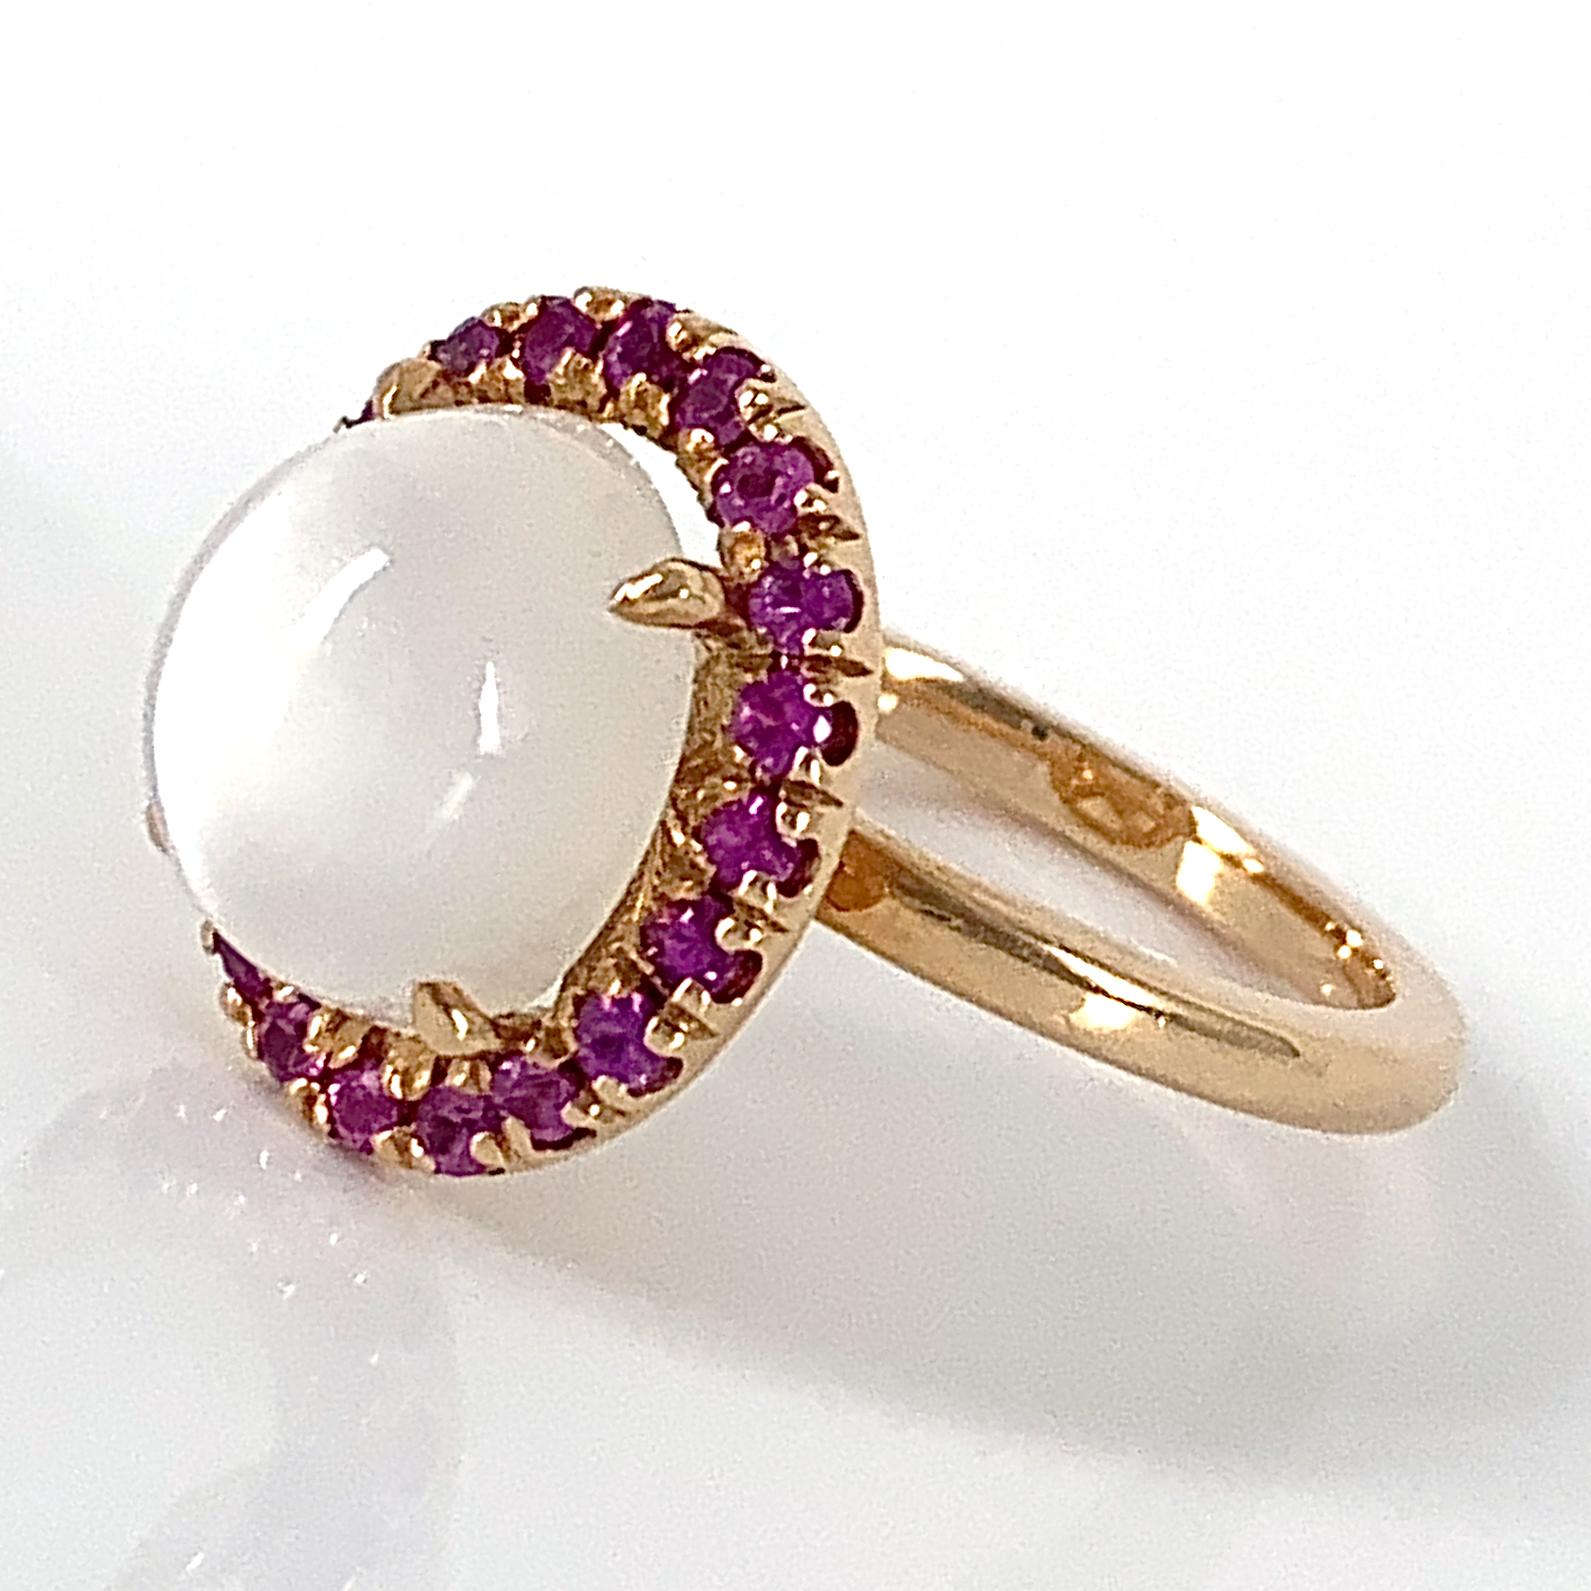 Women's Cats Eye Moonstone Halo Ring with Burmese Rubies in Rose Gold